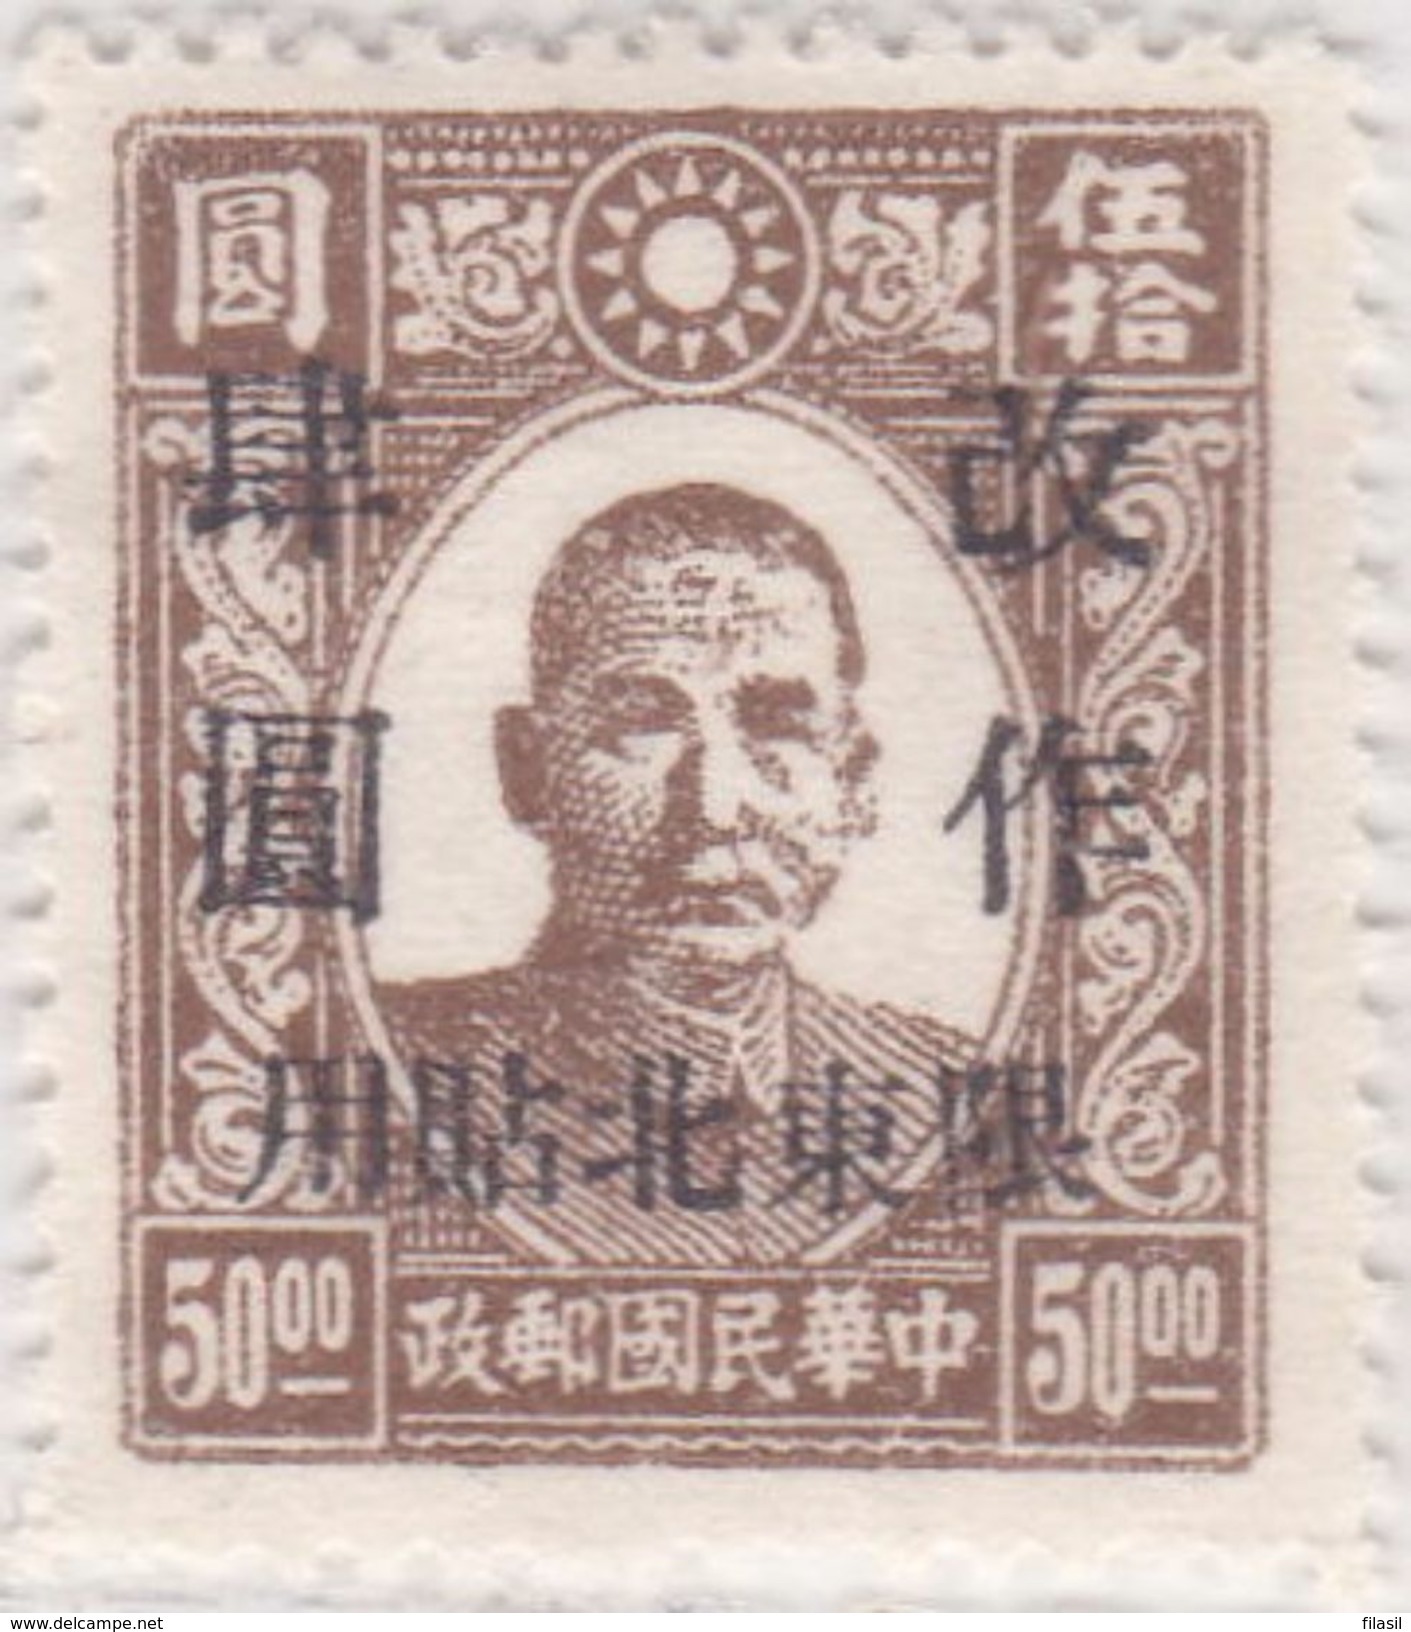 SI53D Cina China Chine 50 Rare Fine  Yuan  Surcharge Missing Print  NO Gum - 1941-45 Chine Du Nord